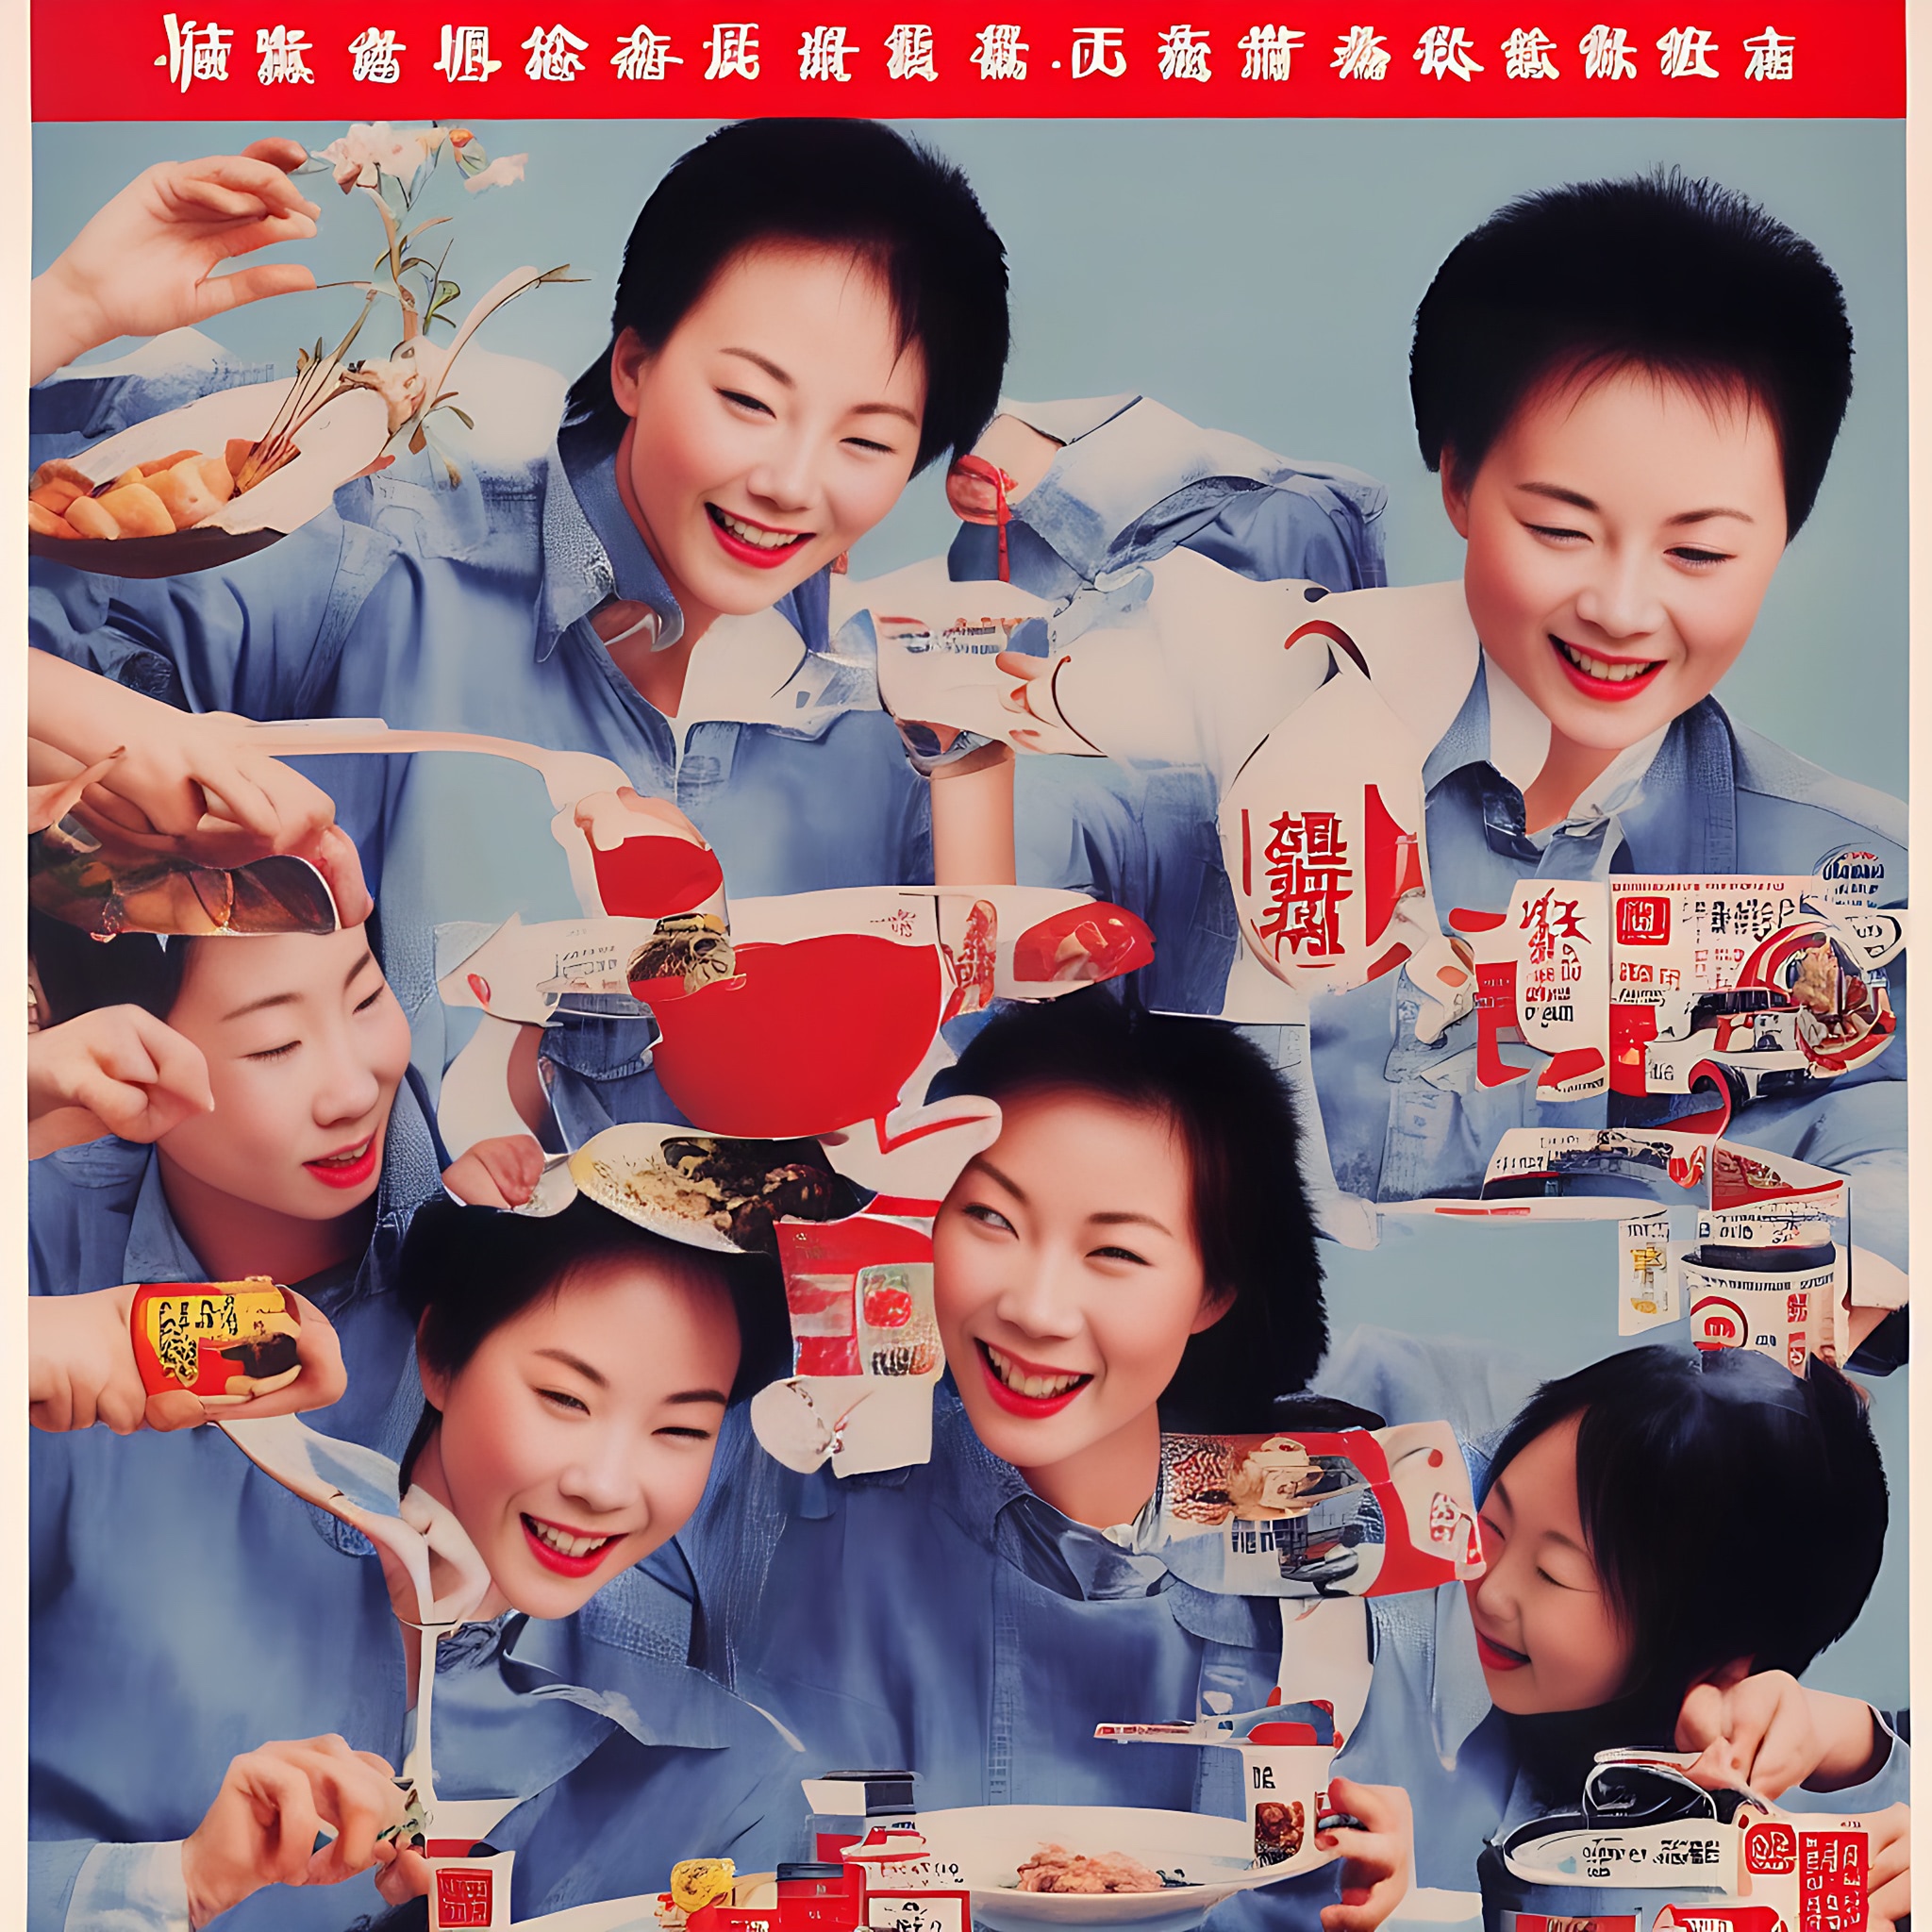 poster-created-in-the-1980s-of-china-design-woman-kitchen-breakfast